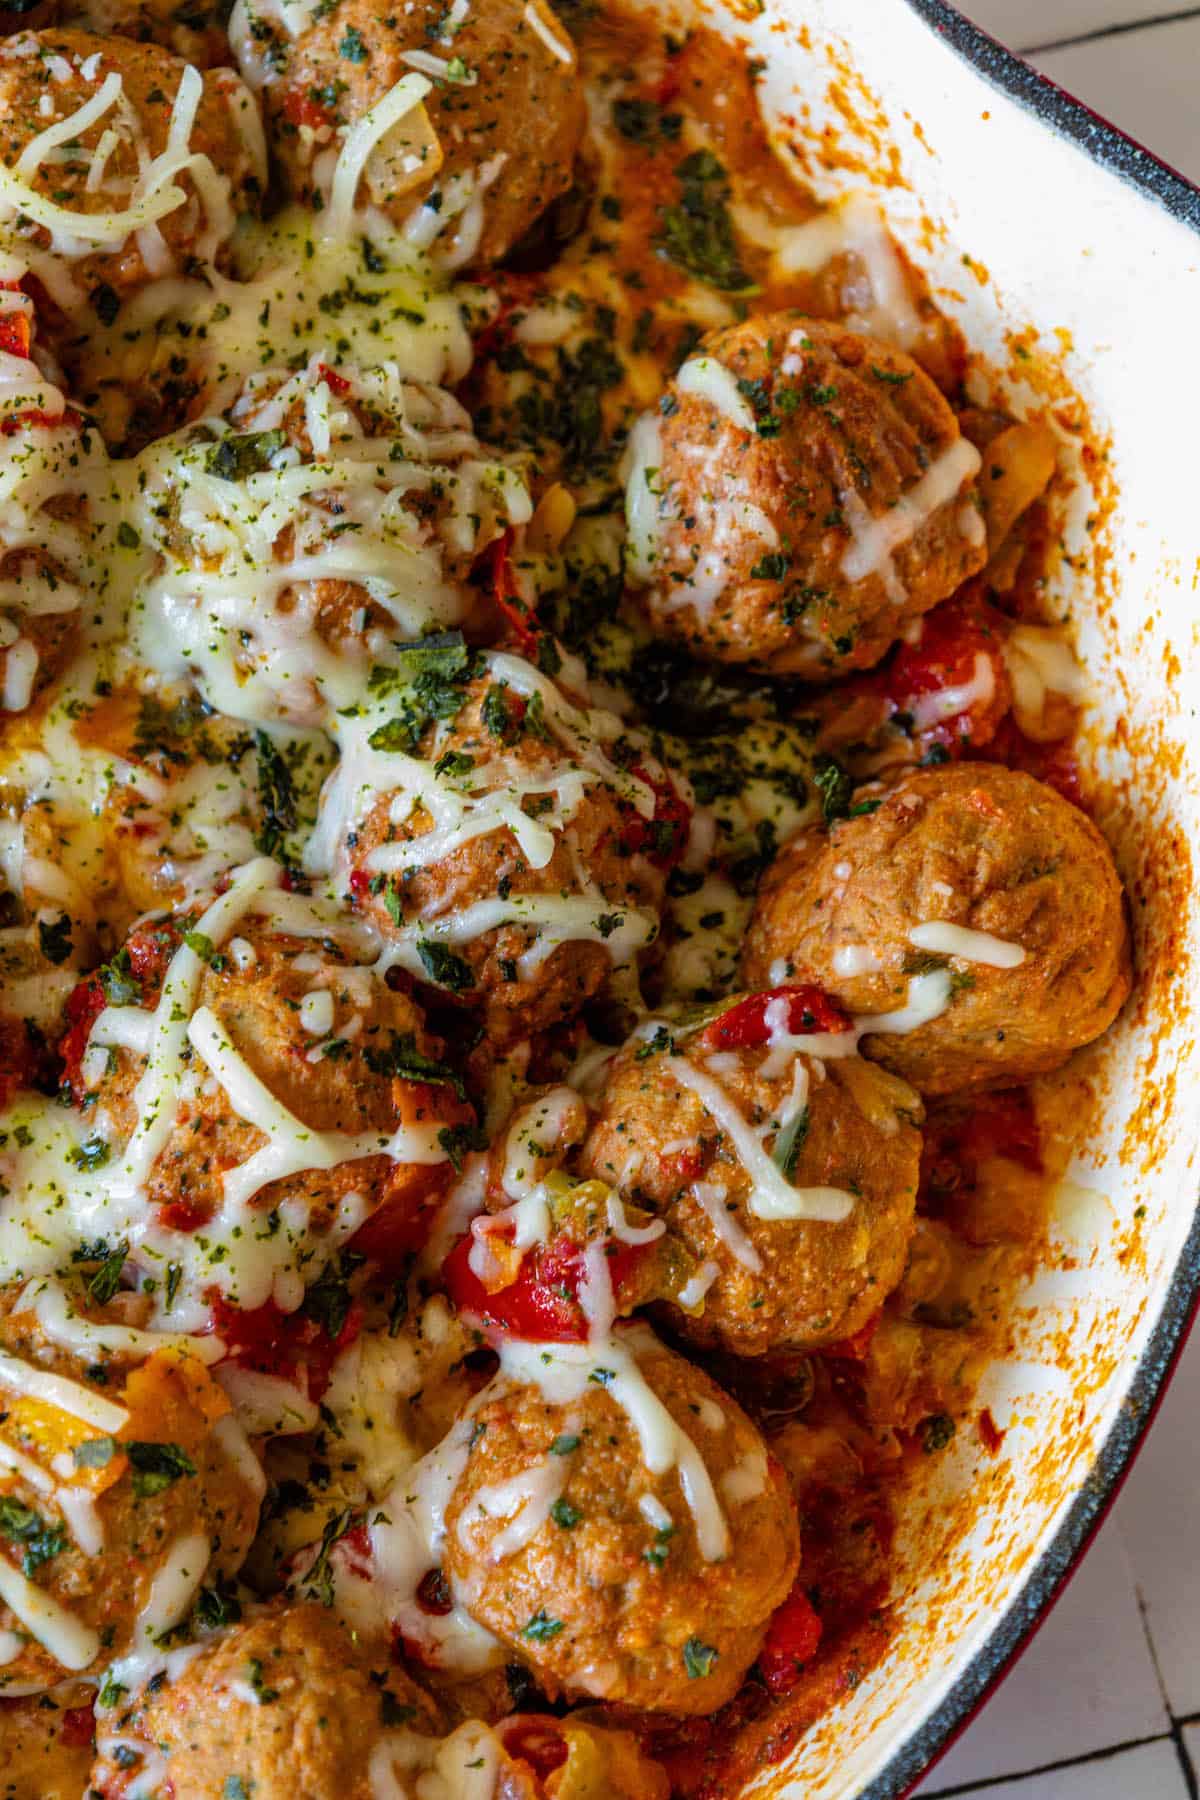 A Cheesy Italian Meatball Skillet filled with vegetables.